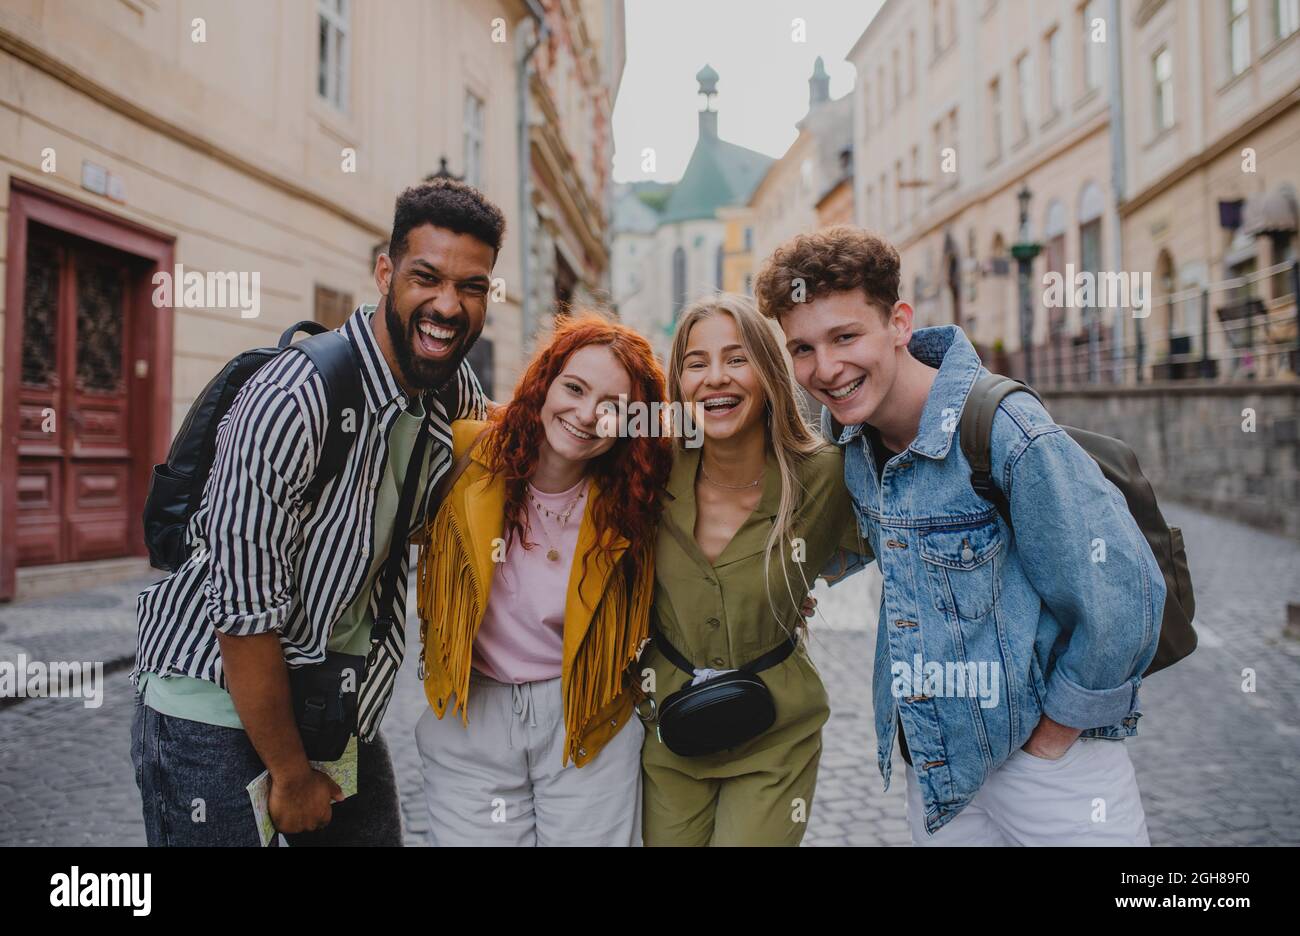 Front view of group of happy young people outdoors on trip in town, looking at camera. Stock Photo